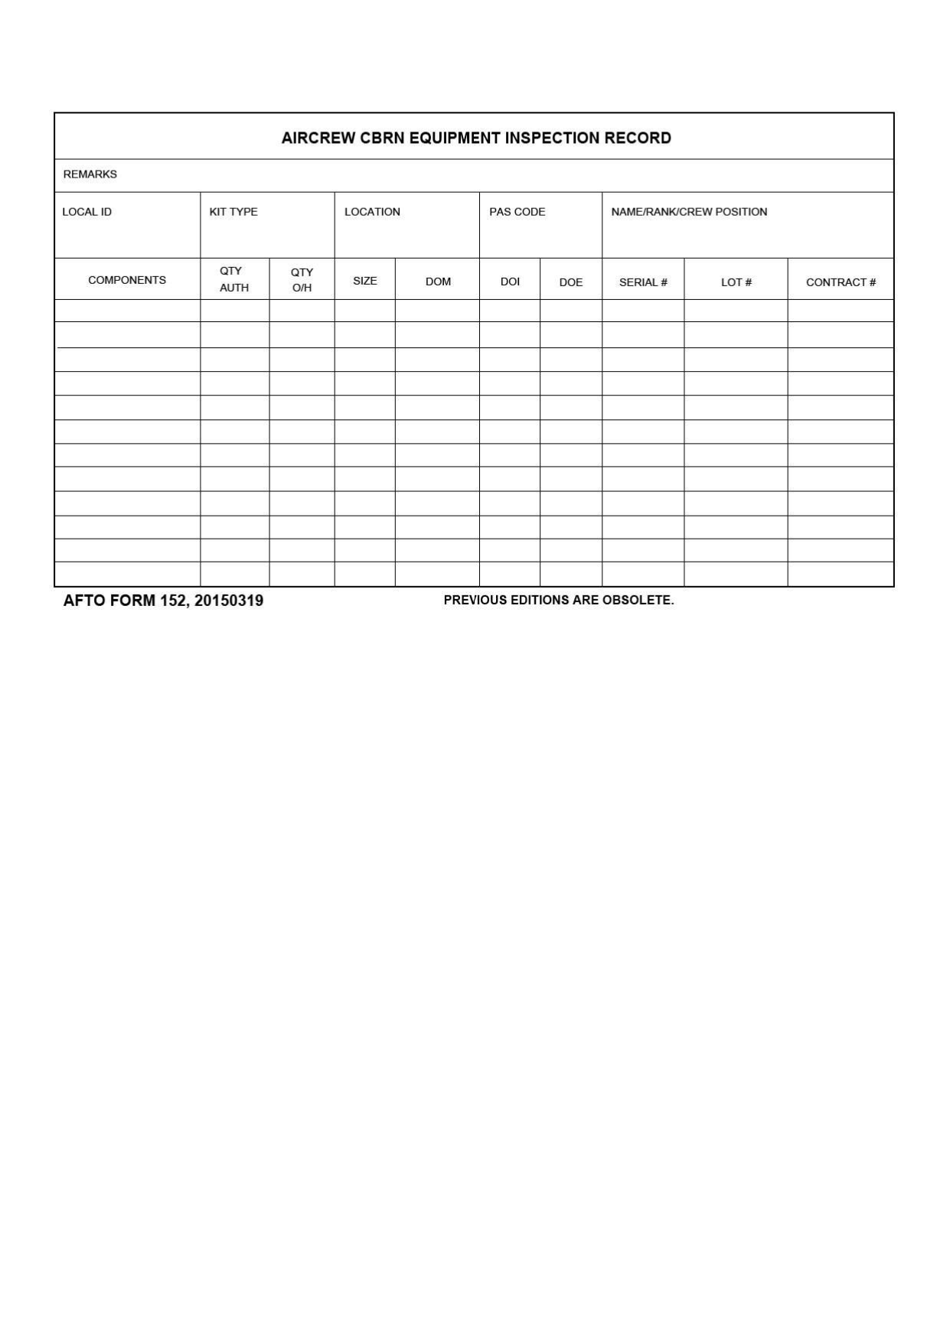 AFTO Form 152 Aircrew Cbrn Equipment Inspection Record, Page 1